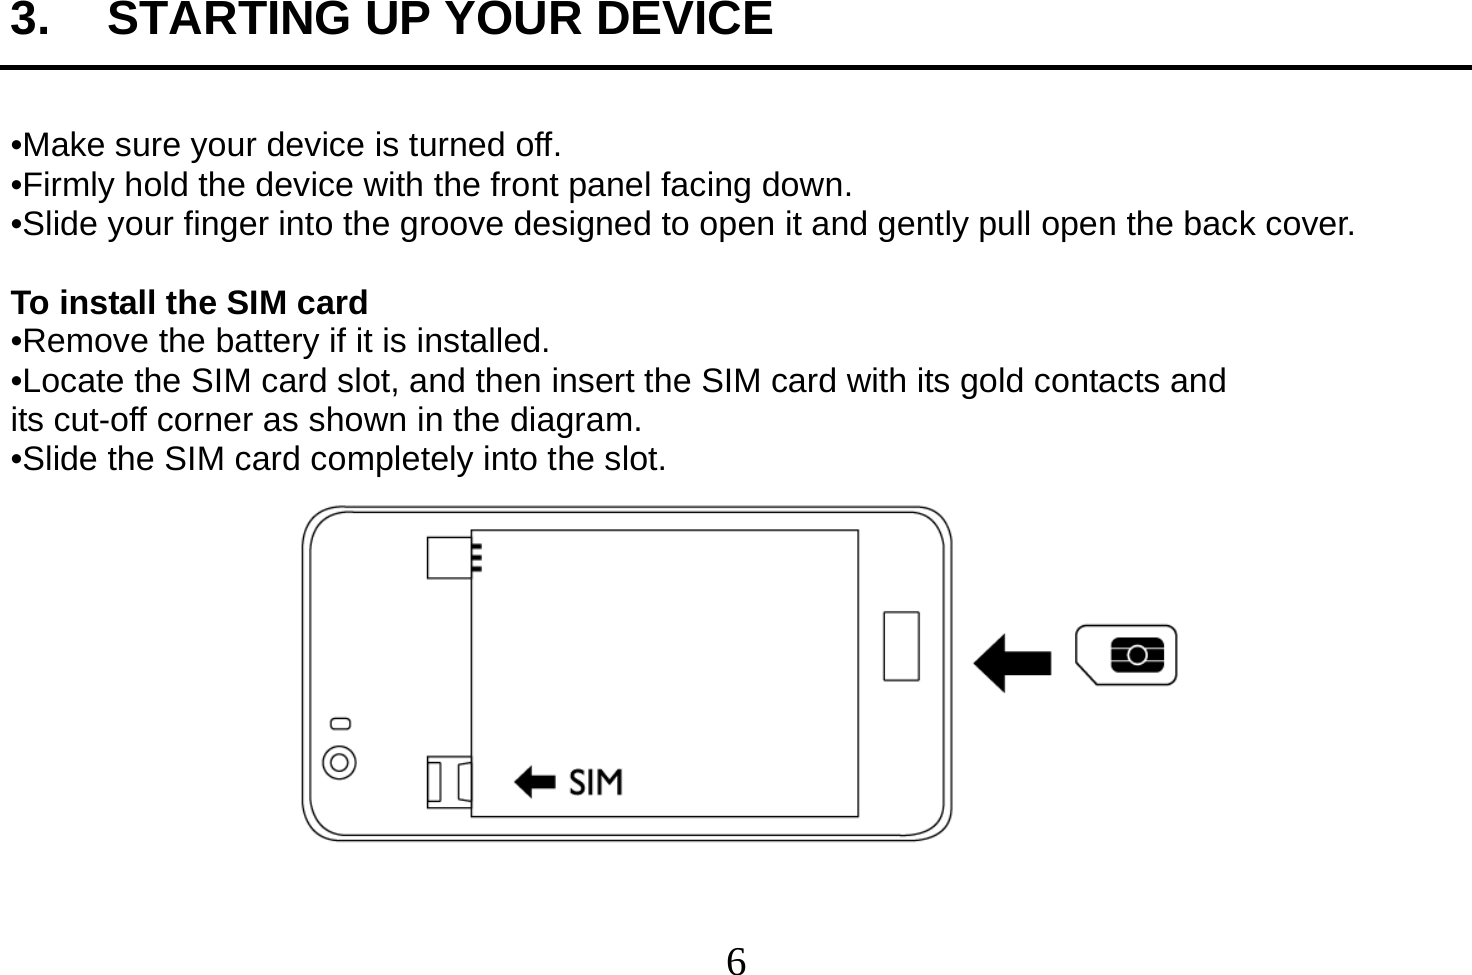  6  3.  STARTING UP YOUR DEVICE  •Make sure your device is turned off. •Firmly hold the device with the front panel facing down. •Slide your finger into the groove designed to open it and gently pull open the back cover.  To install the SIM card •Remove the battery if it is installed. •Locate the SIM card slot, and then insert the SIM card with its gold contacts and its cut-off corner as shown in the diagram. •Slide the SIM card completely into the slot.   